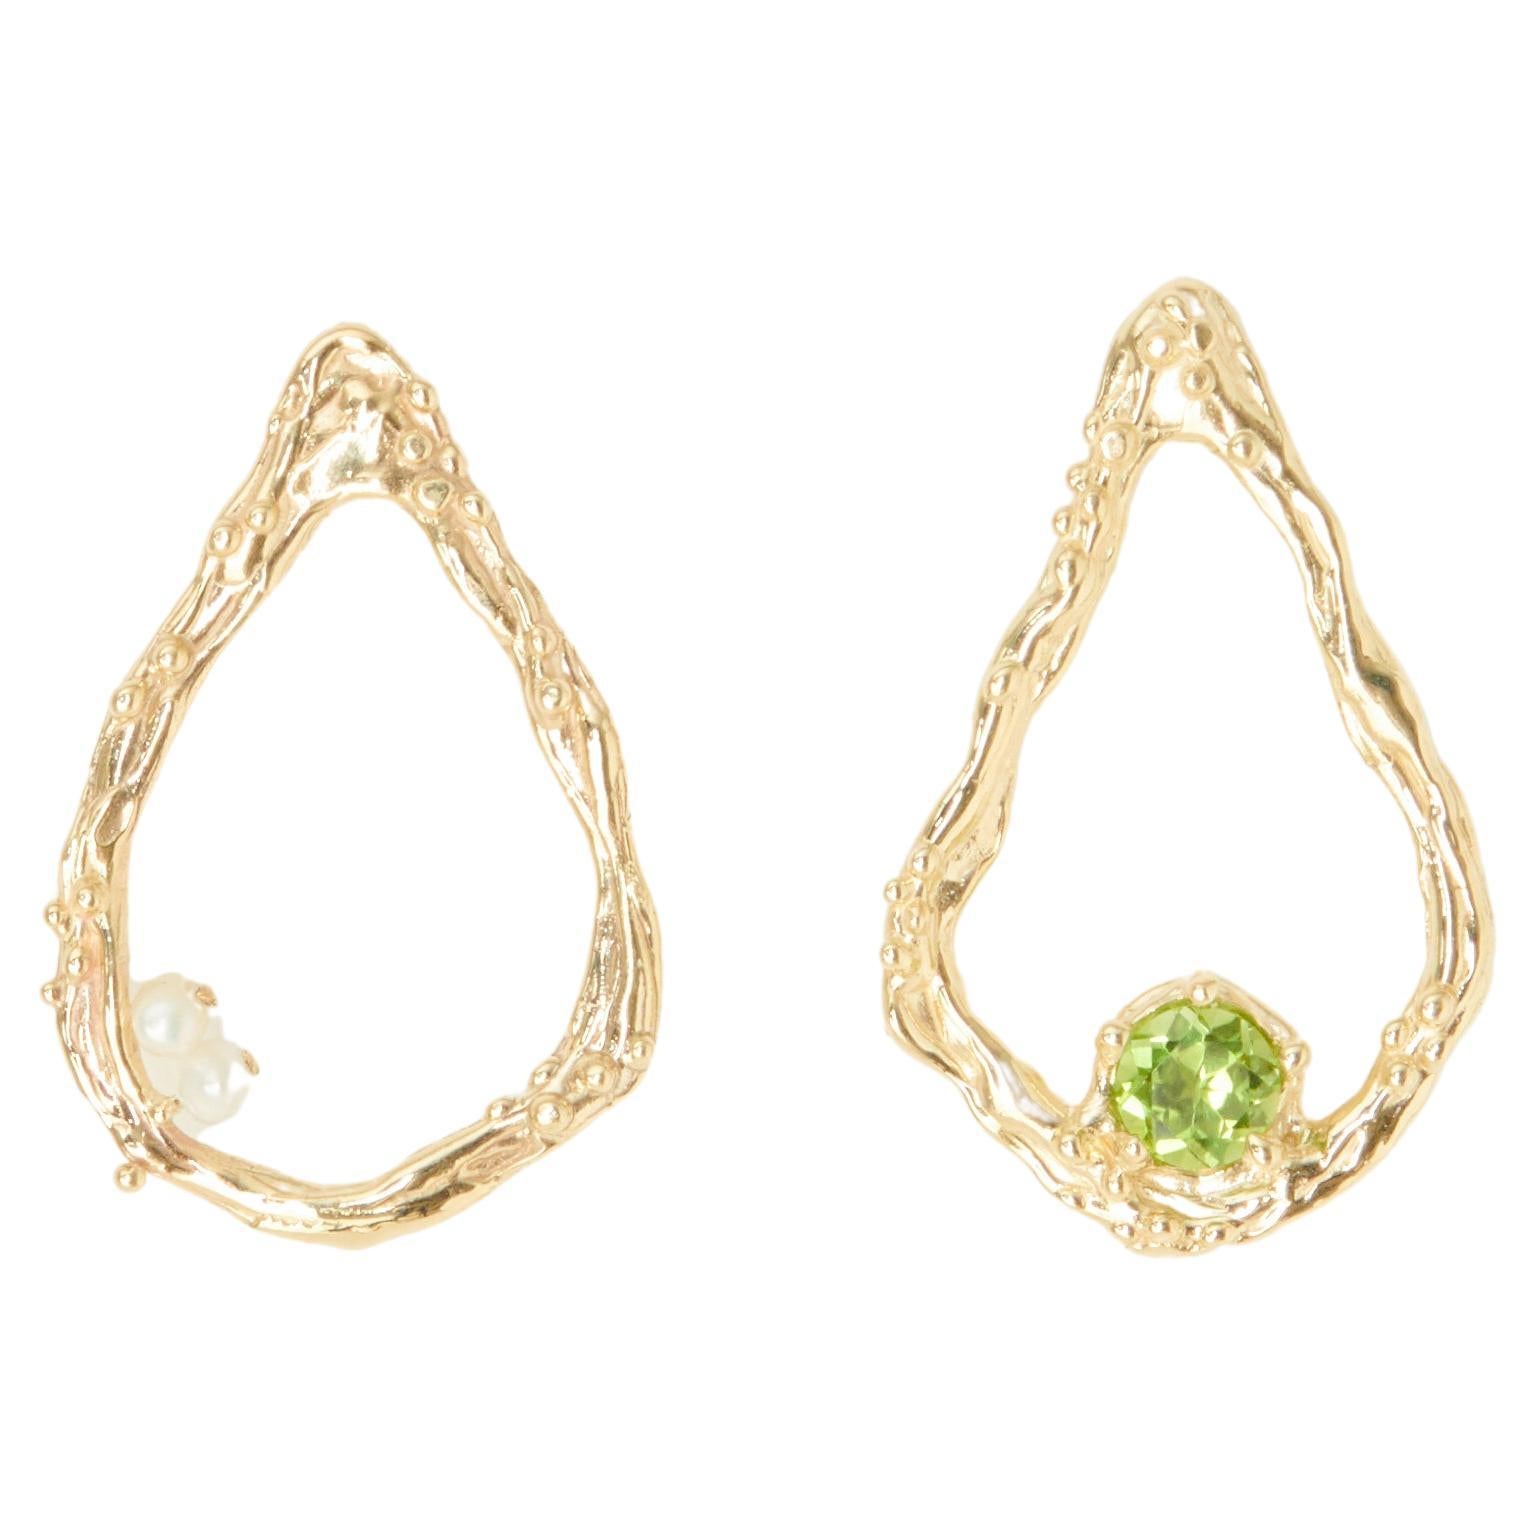 Drop earrings with Peridot and Pearls For Sale